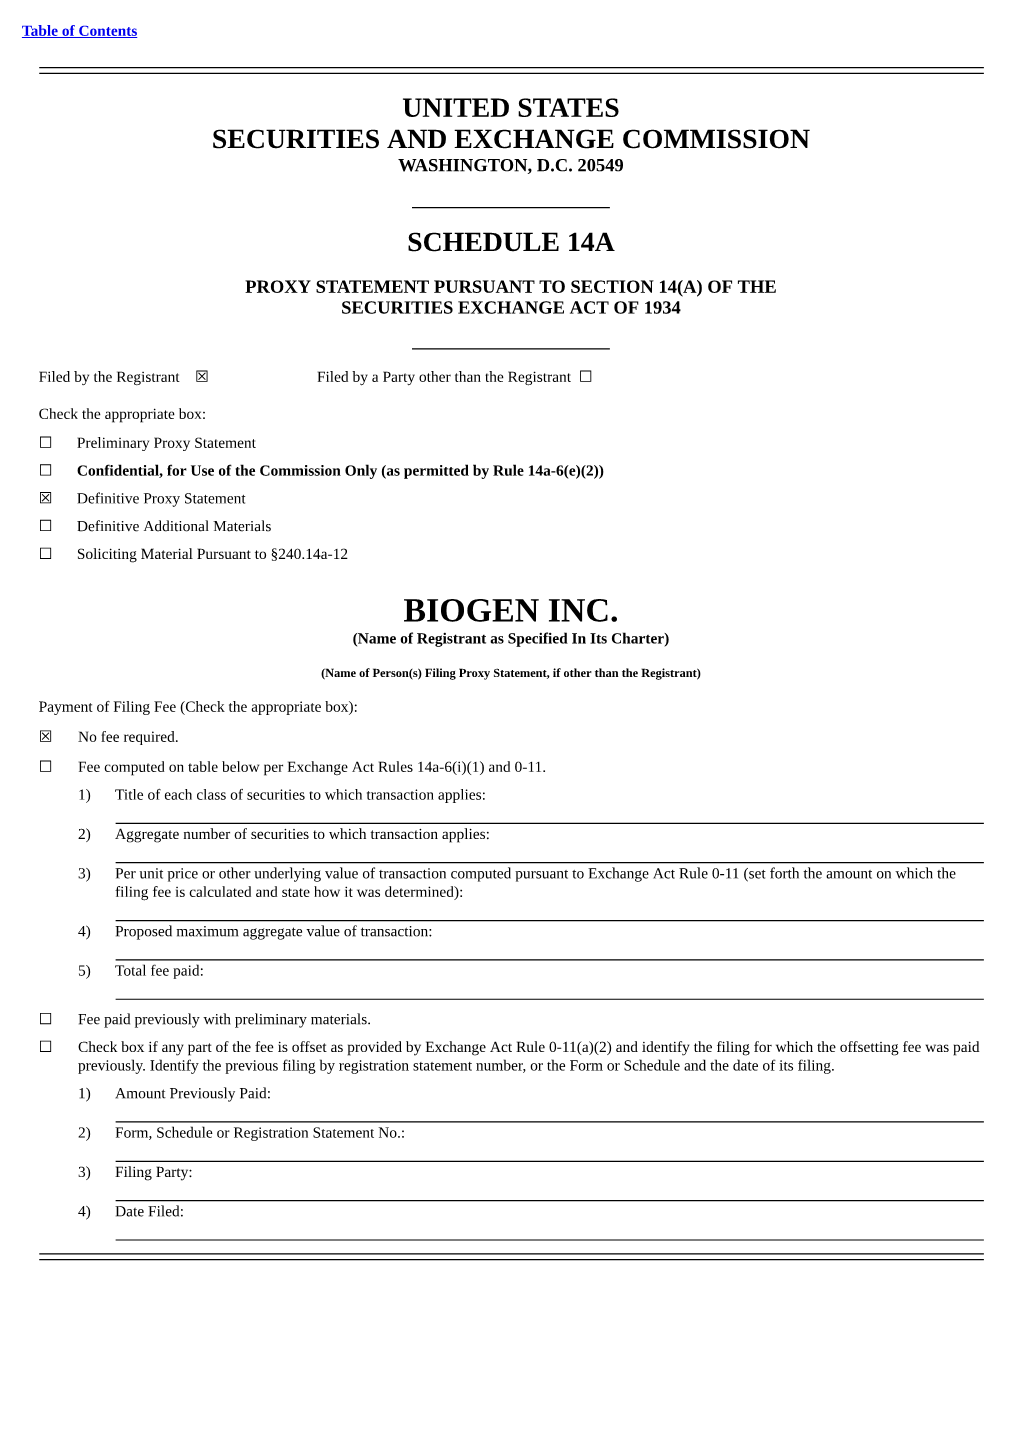 BIOGEN INC. (Name of Registrant As Specified in Its Charter)